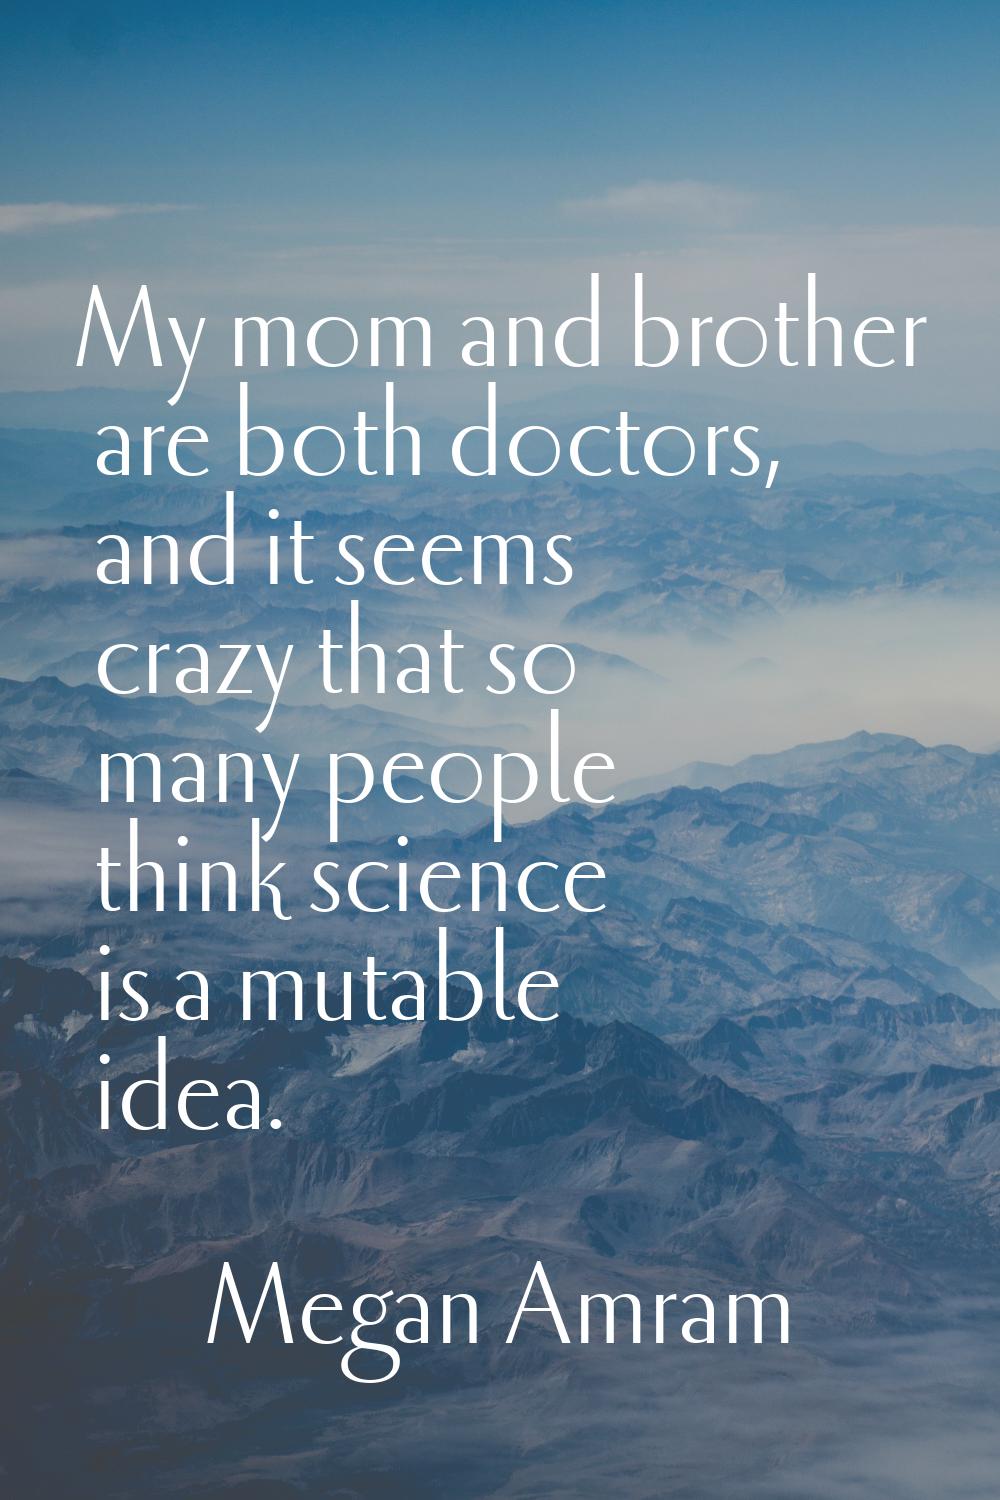 My mom and brother are both doctors, and it seems crazy that so many people think science is a muta